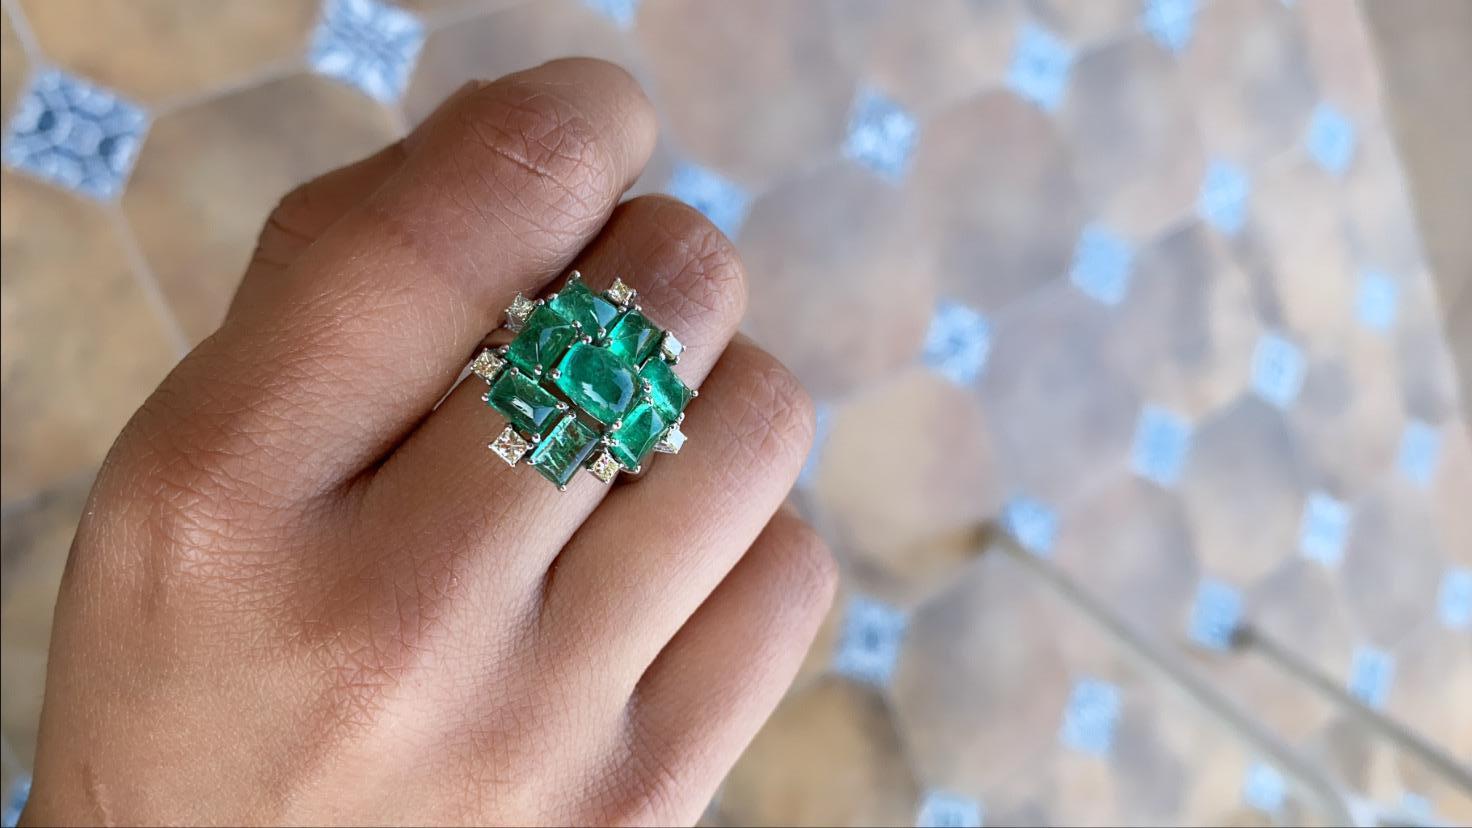 A modern and chic , uniquely designed natural emerald and diamond ring set in 18k white gold. The emerald weight is 5.95 carats and diamond weight is .40 carats. The net gold weight is 7.16 grams and ring dimensions in cm 2 x 2 x 2.6 (LXWXH). US